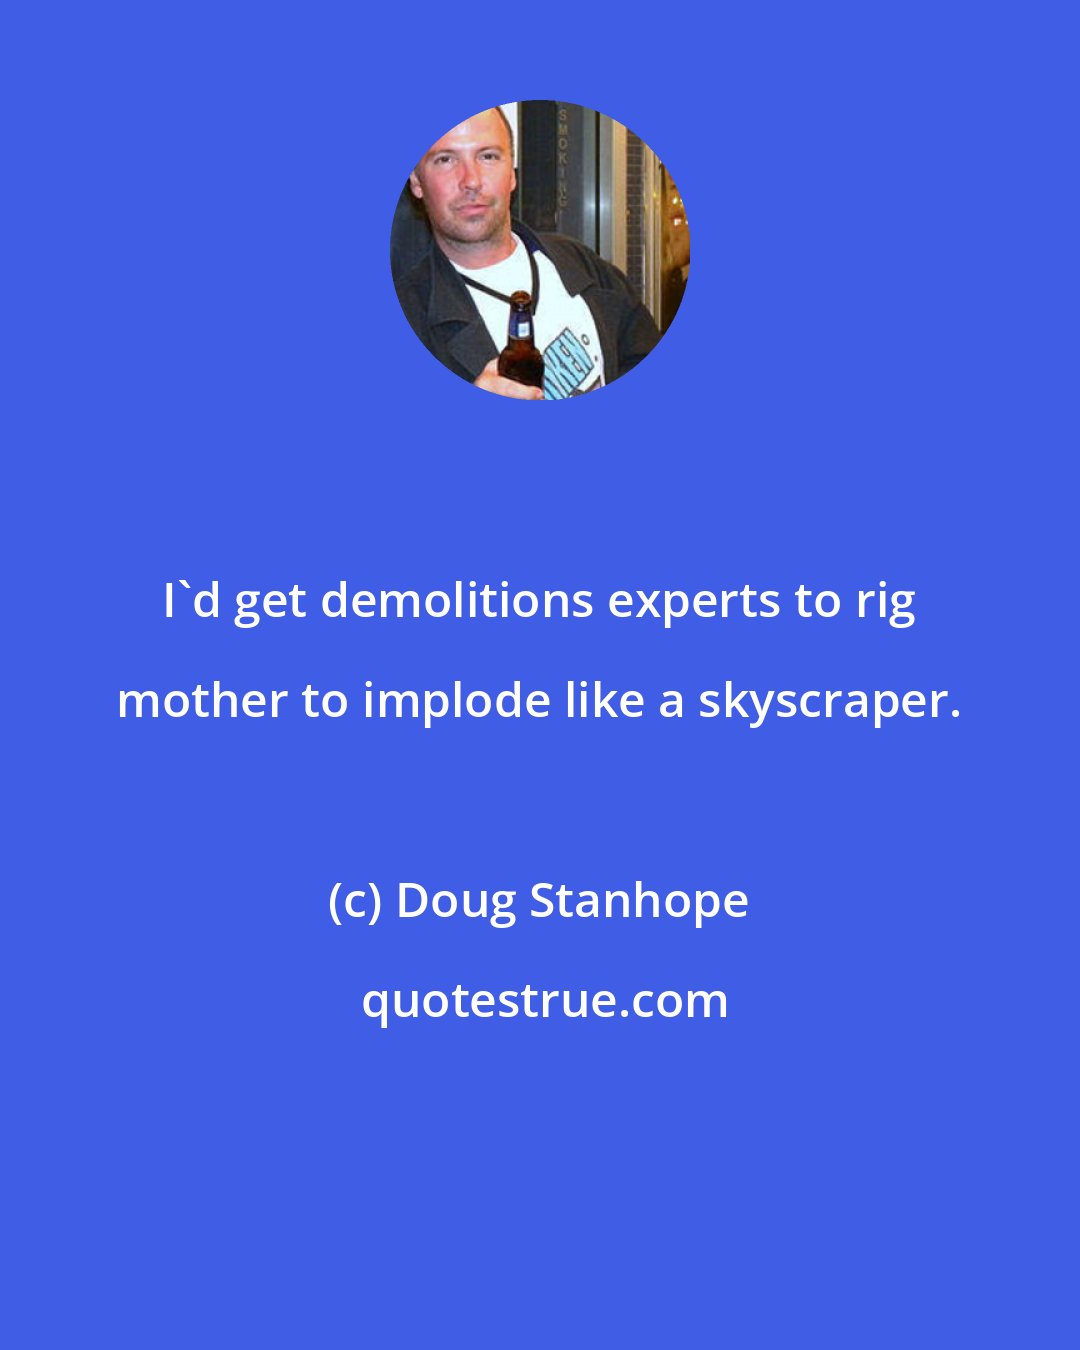 Doug Stanhope: I'd get demolitions experts to rig mother to implode like a skyscraper.